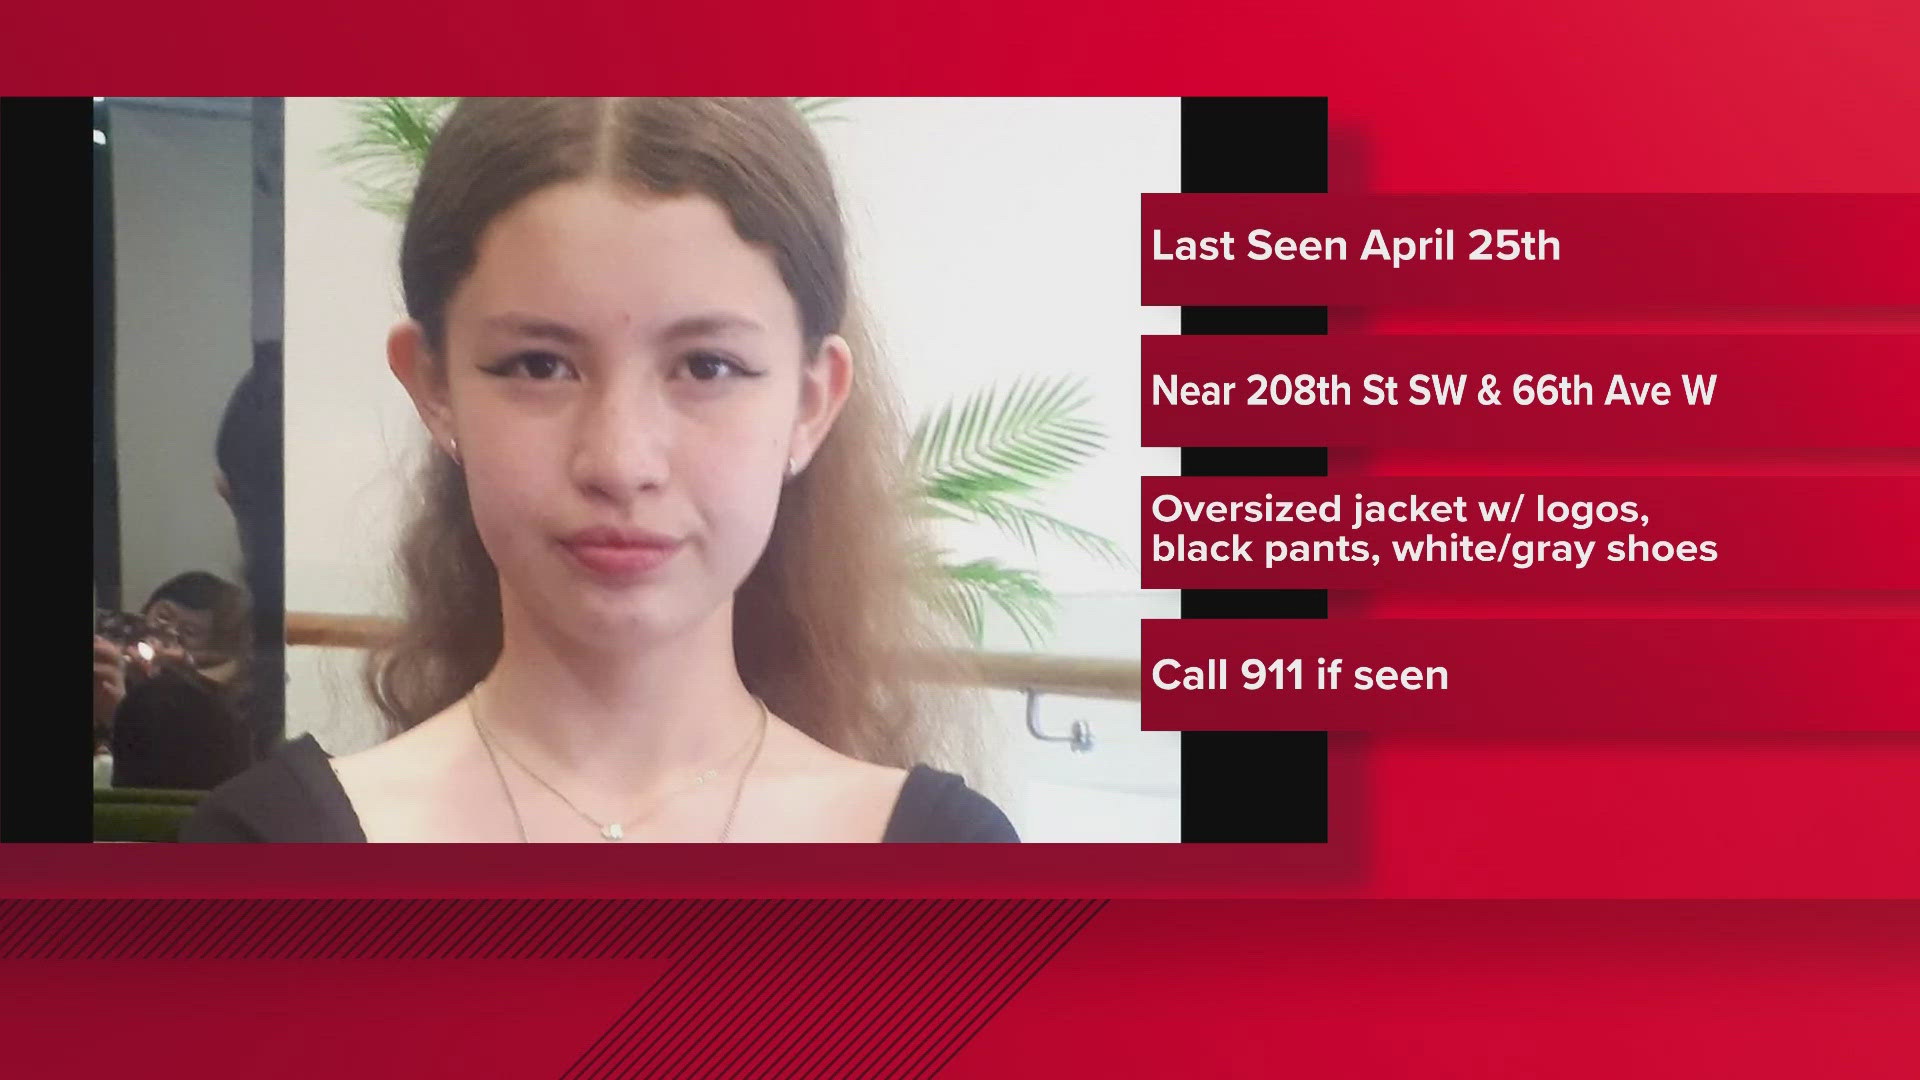 13-year-old Angelina Altantsetseg was last seen on April 25th near 208th St. SW, a block east of Pacific Highway.